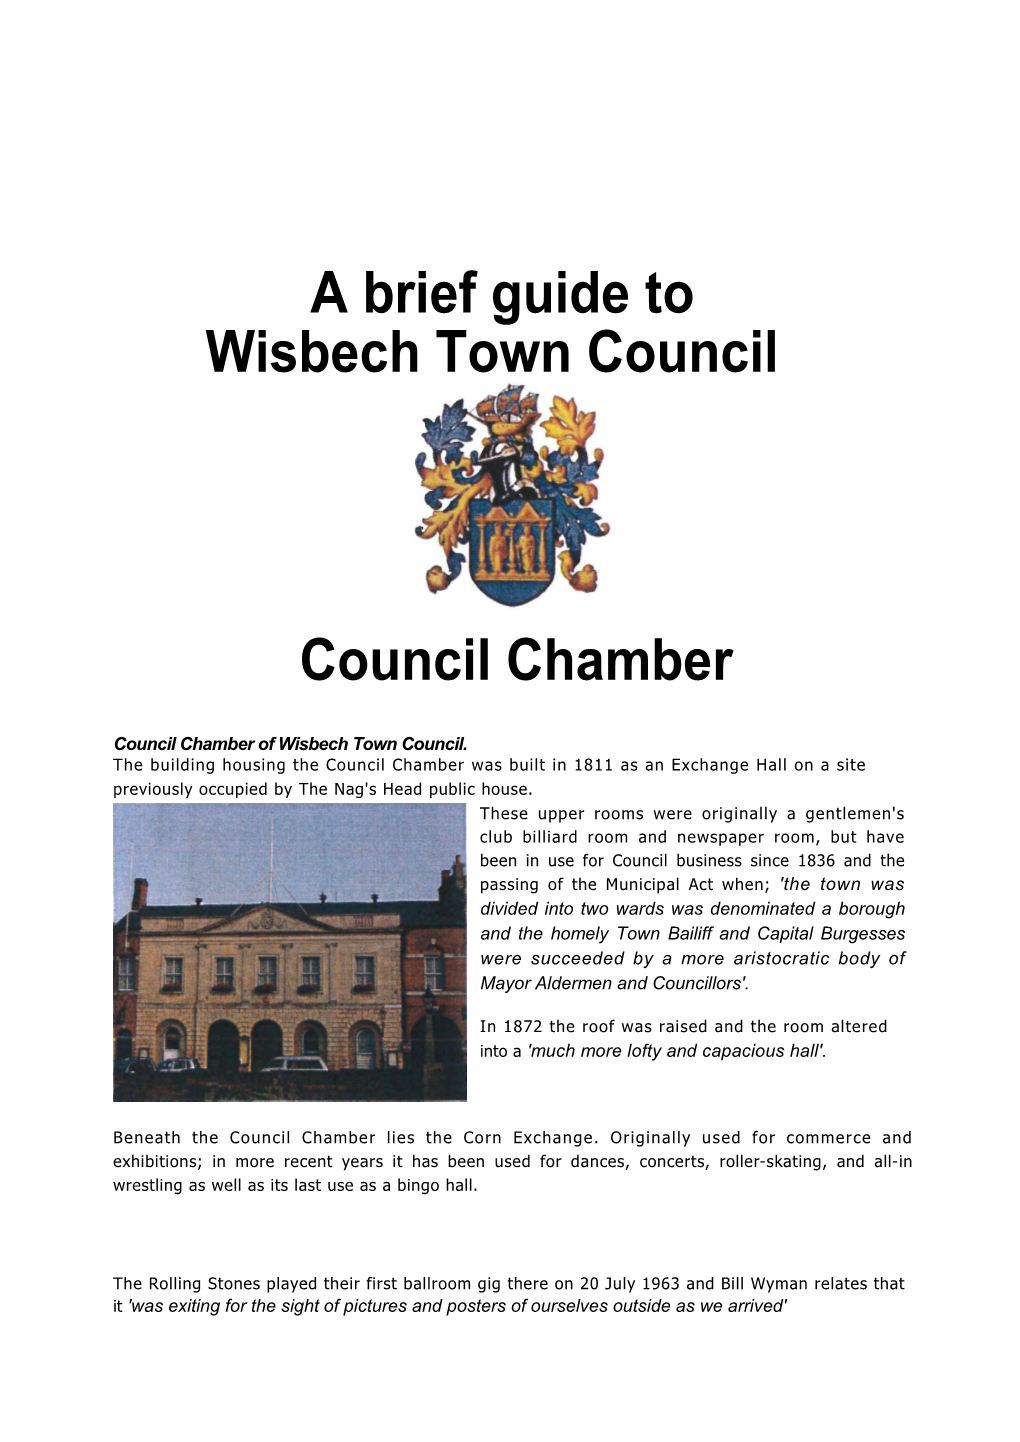 A Brief Guide to Wisbech Town Council Council Chamber